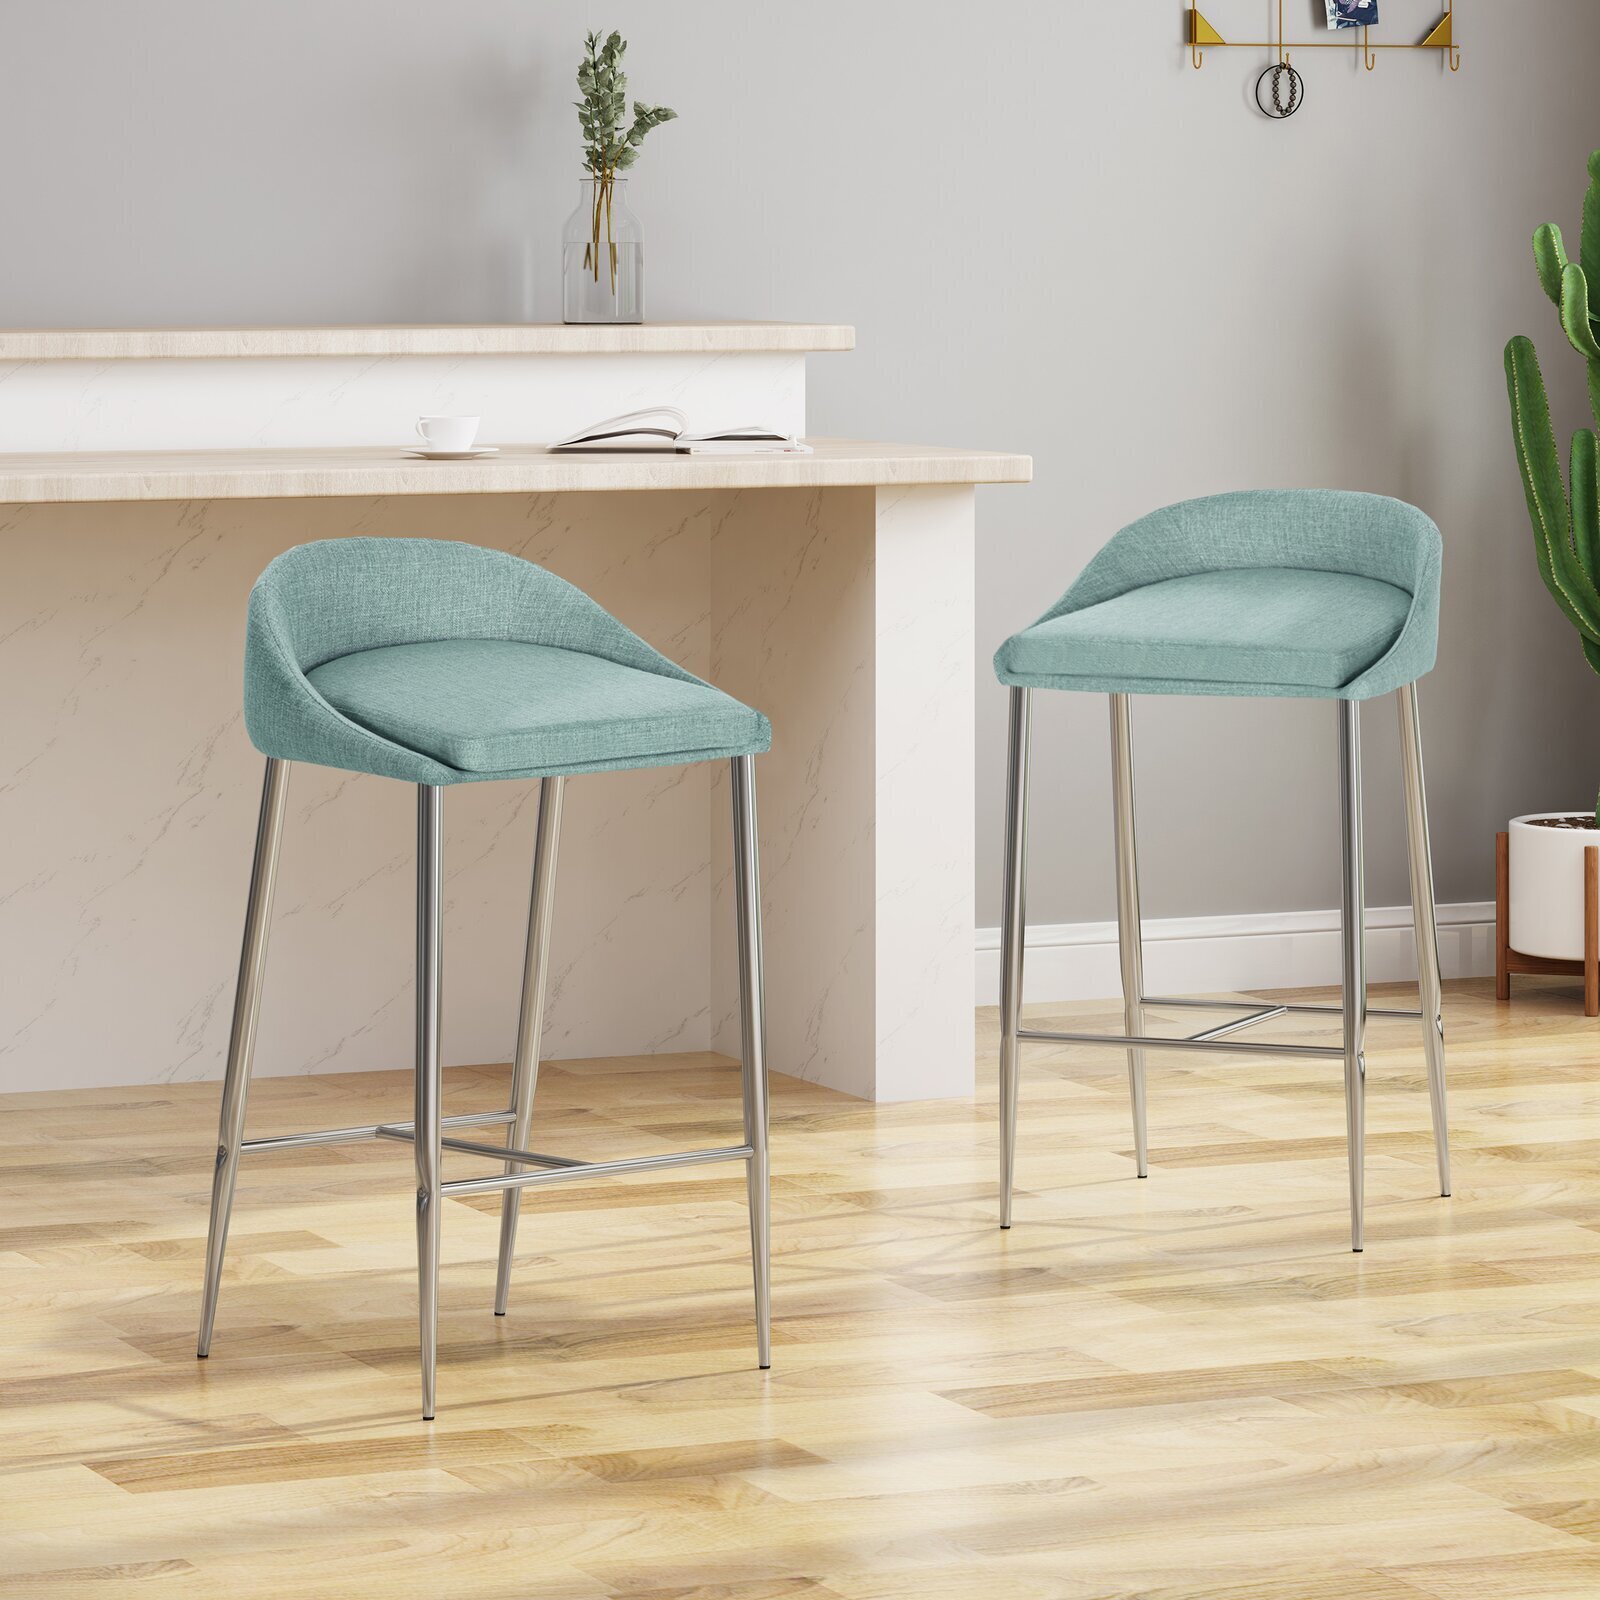 Contemporary turquoise counter height chairs